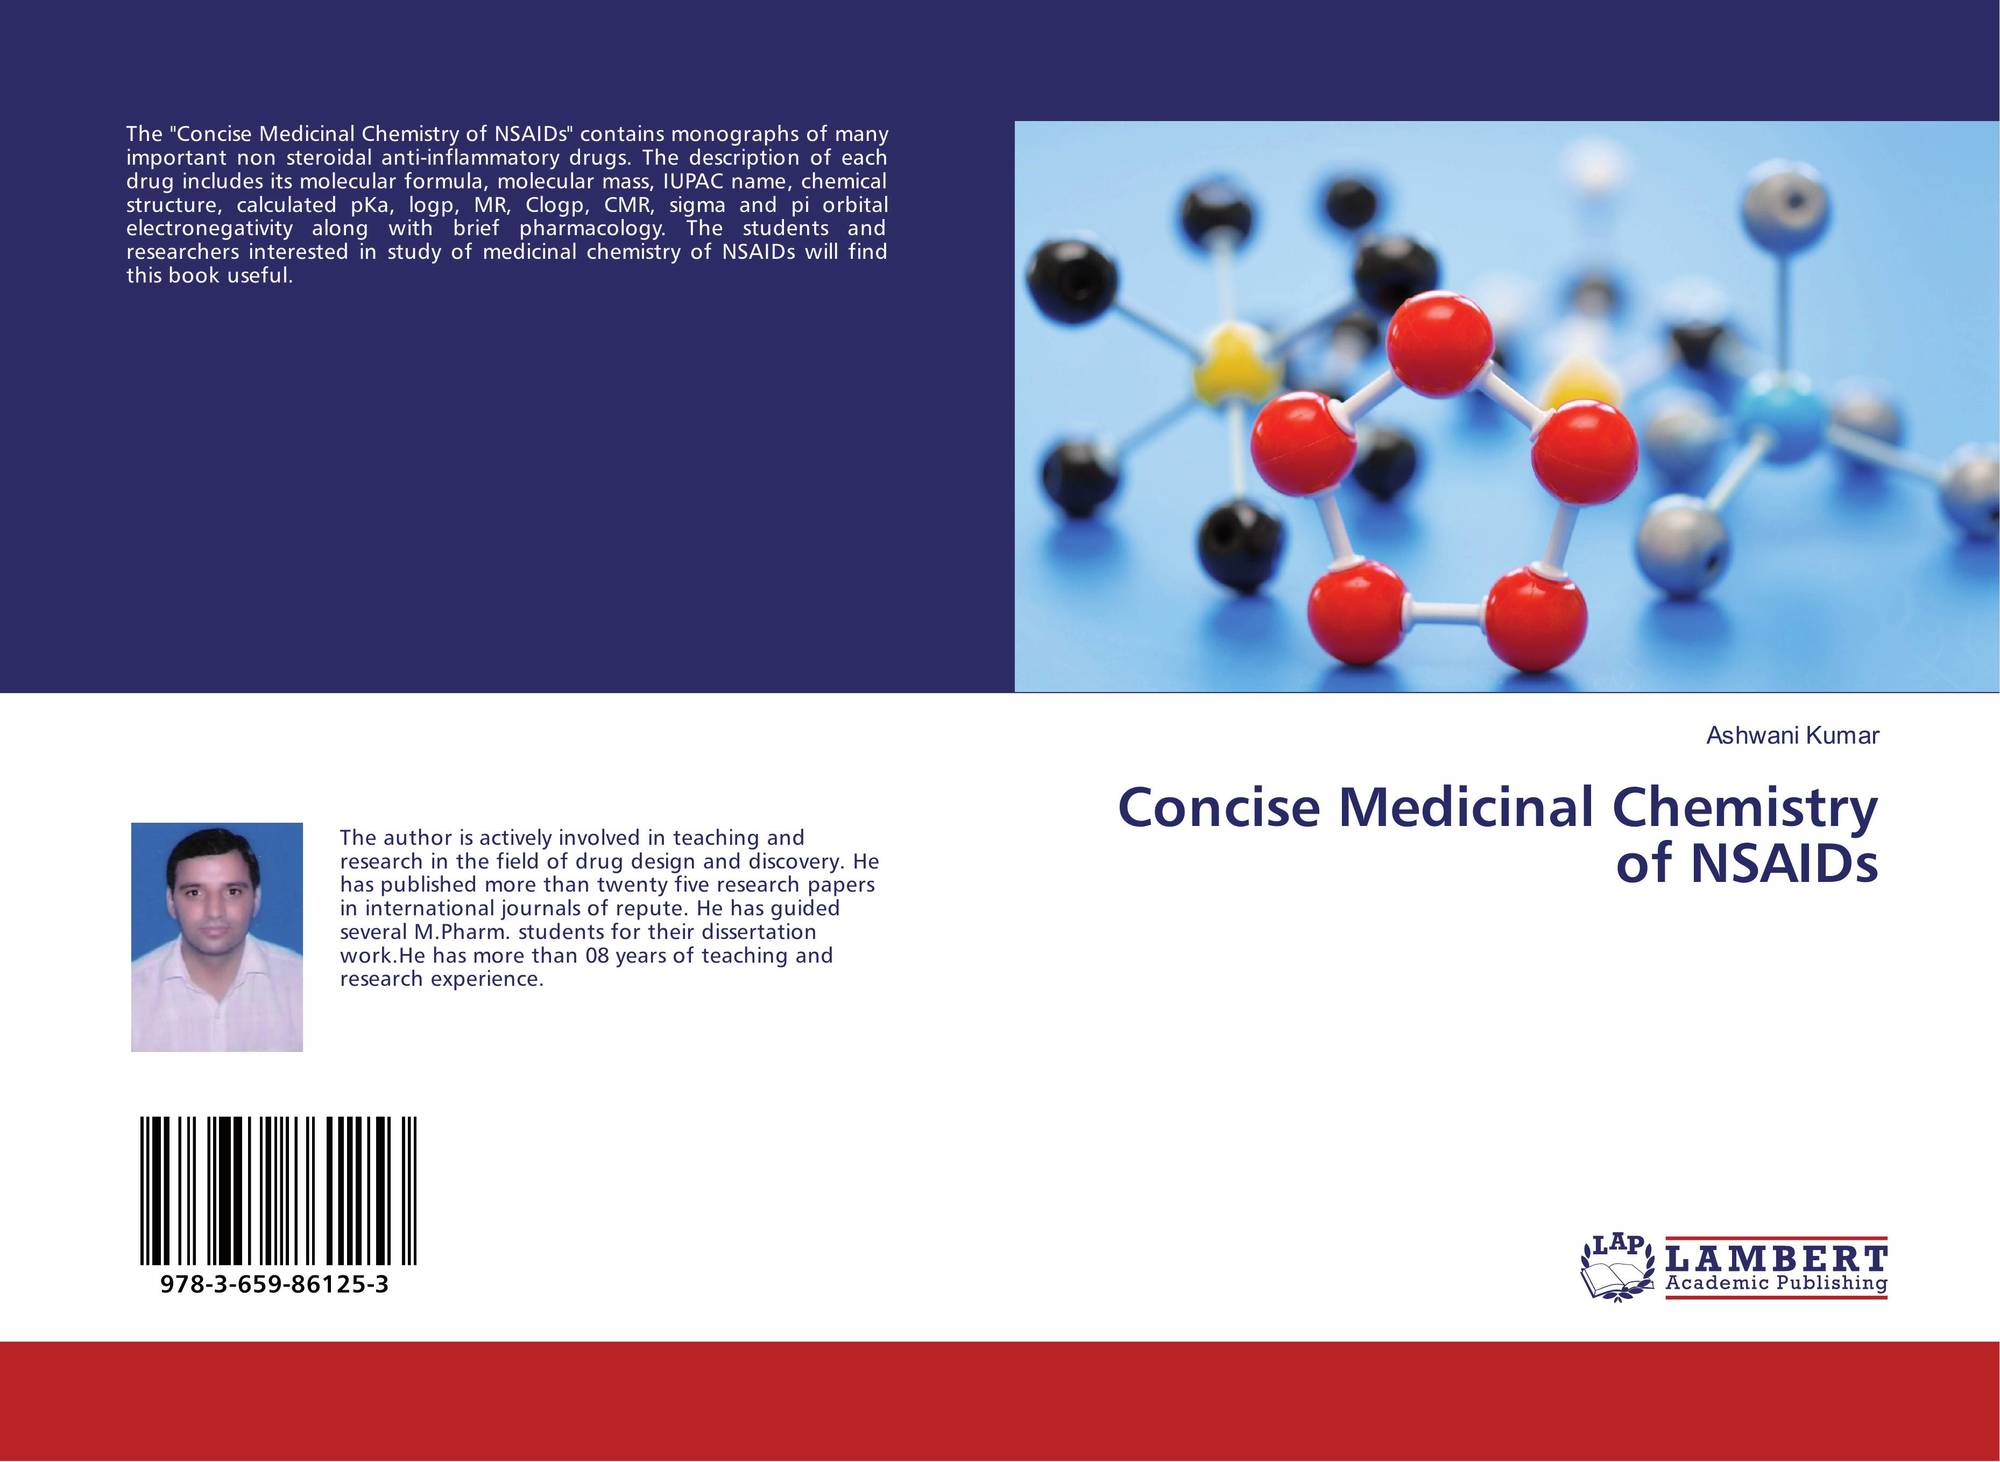 research and reports in medicinal chemistry